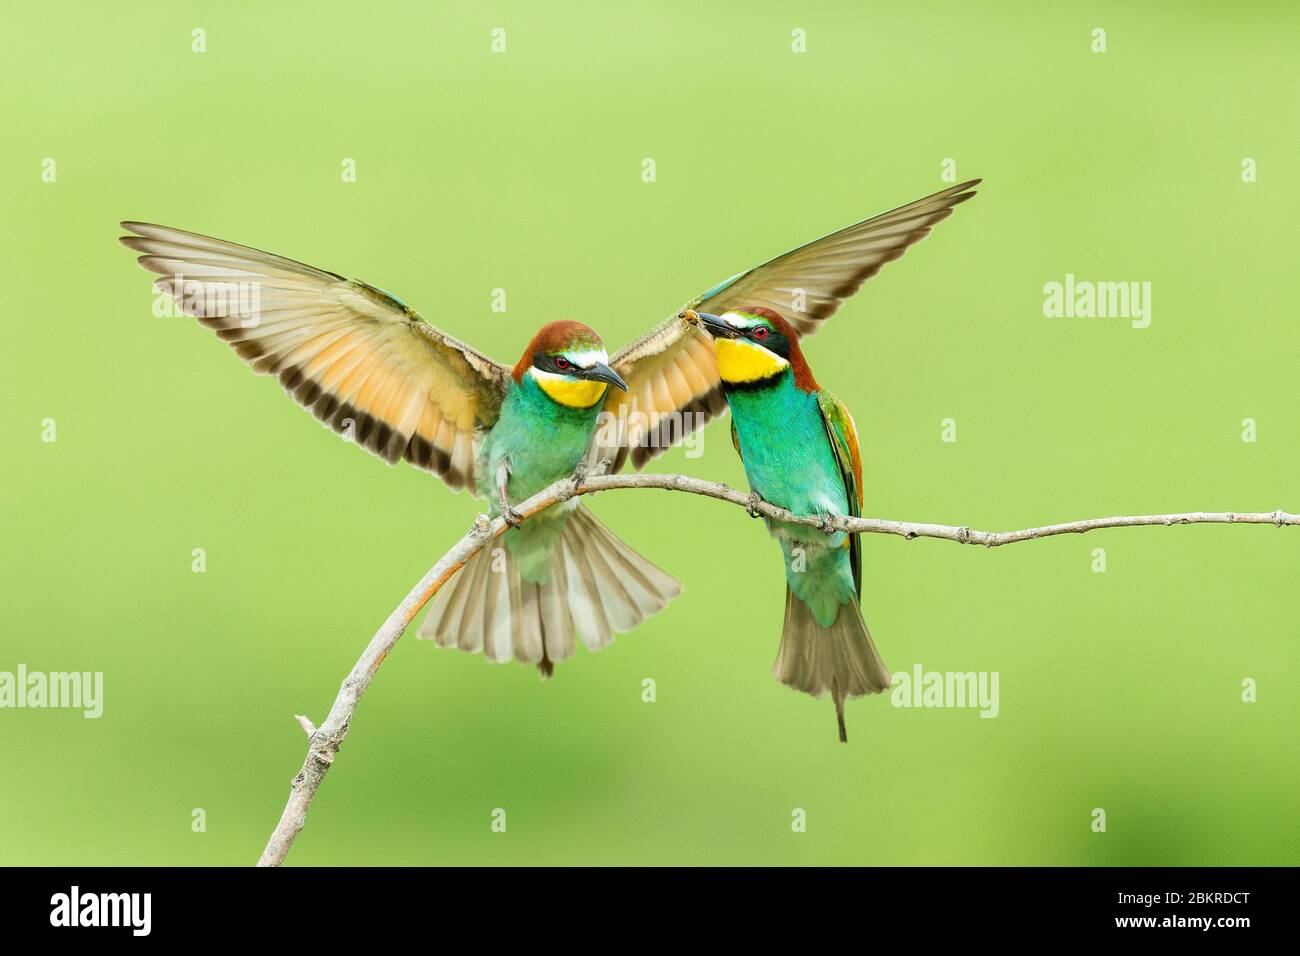 A European bee-eater (Merops apiaster) courting a female by passing her an insect, Bulgaria Stock Photo